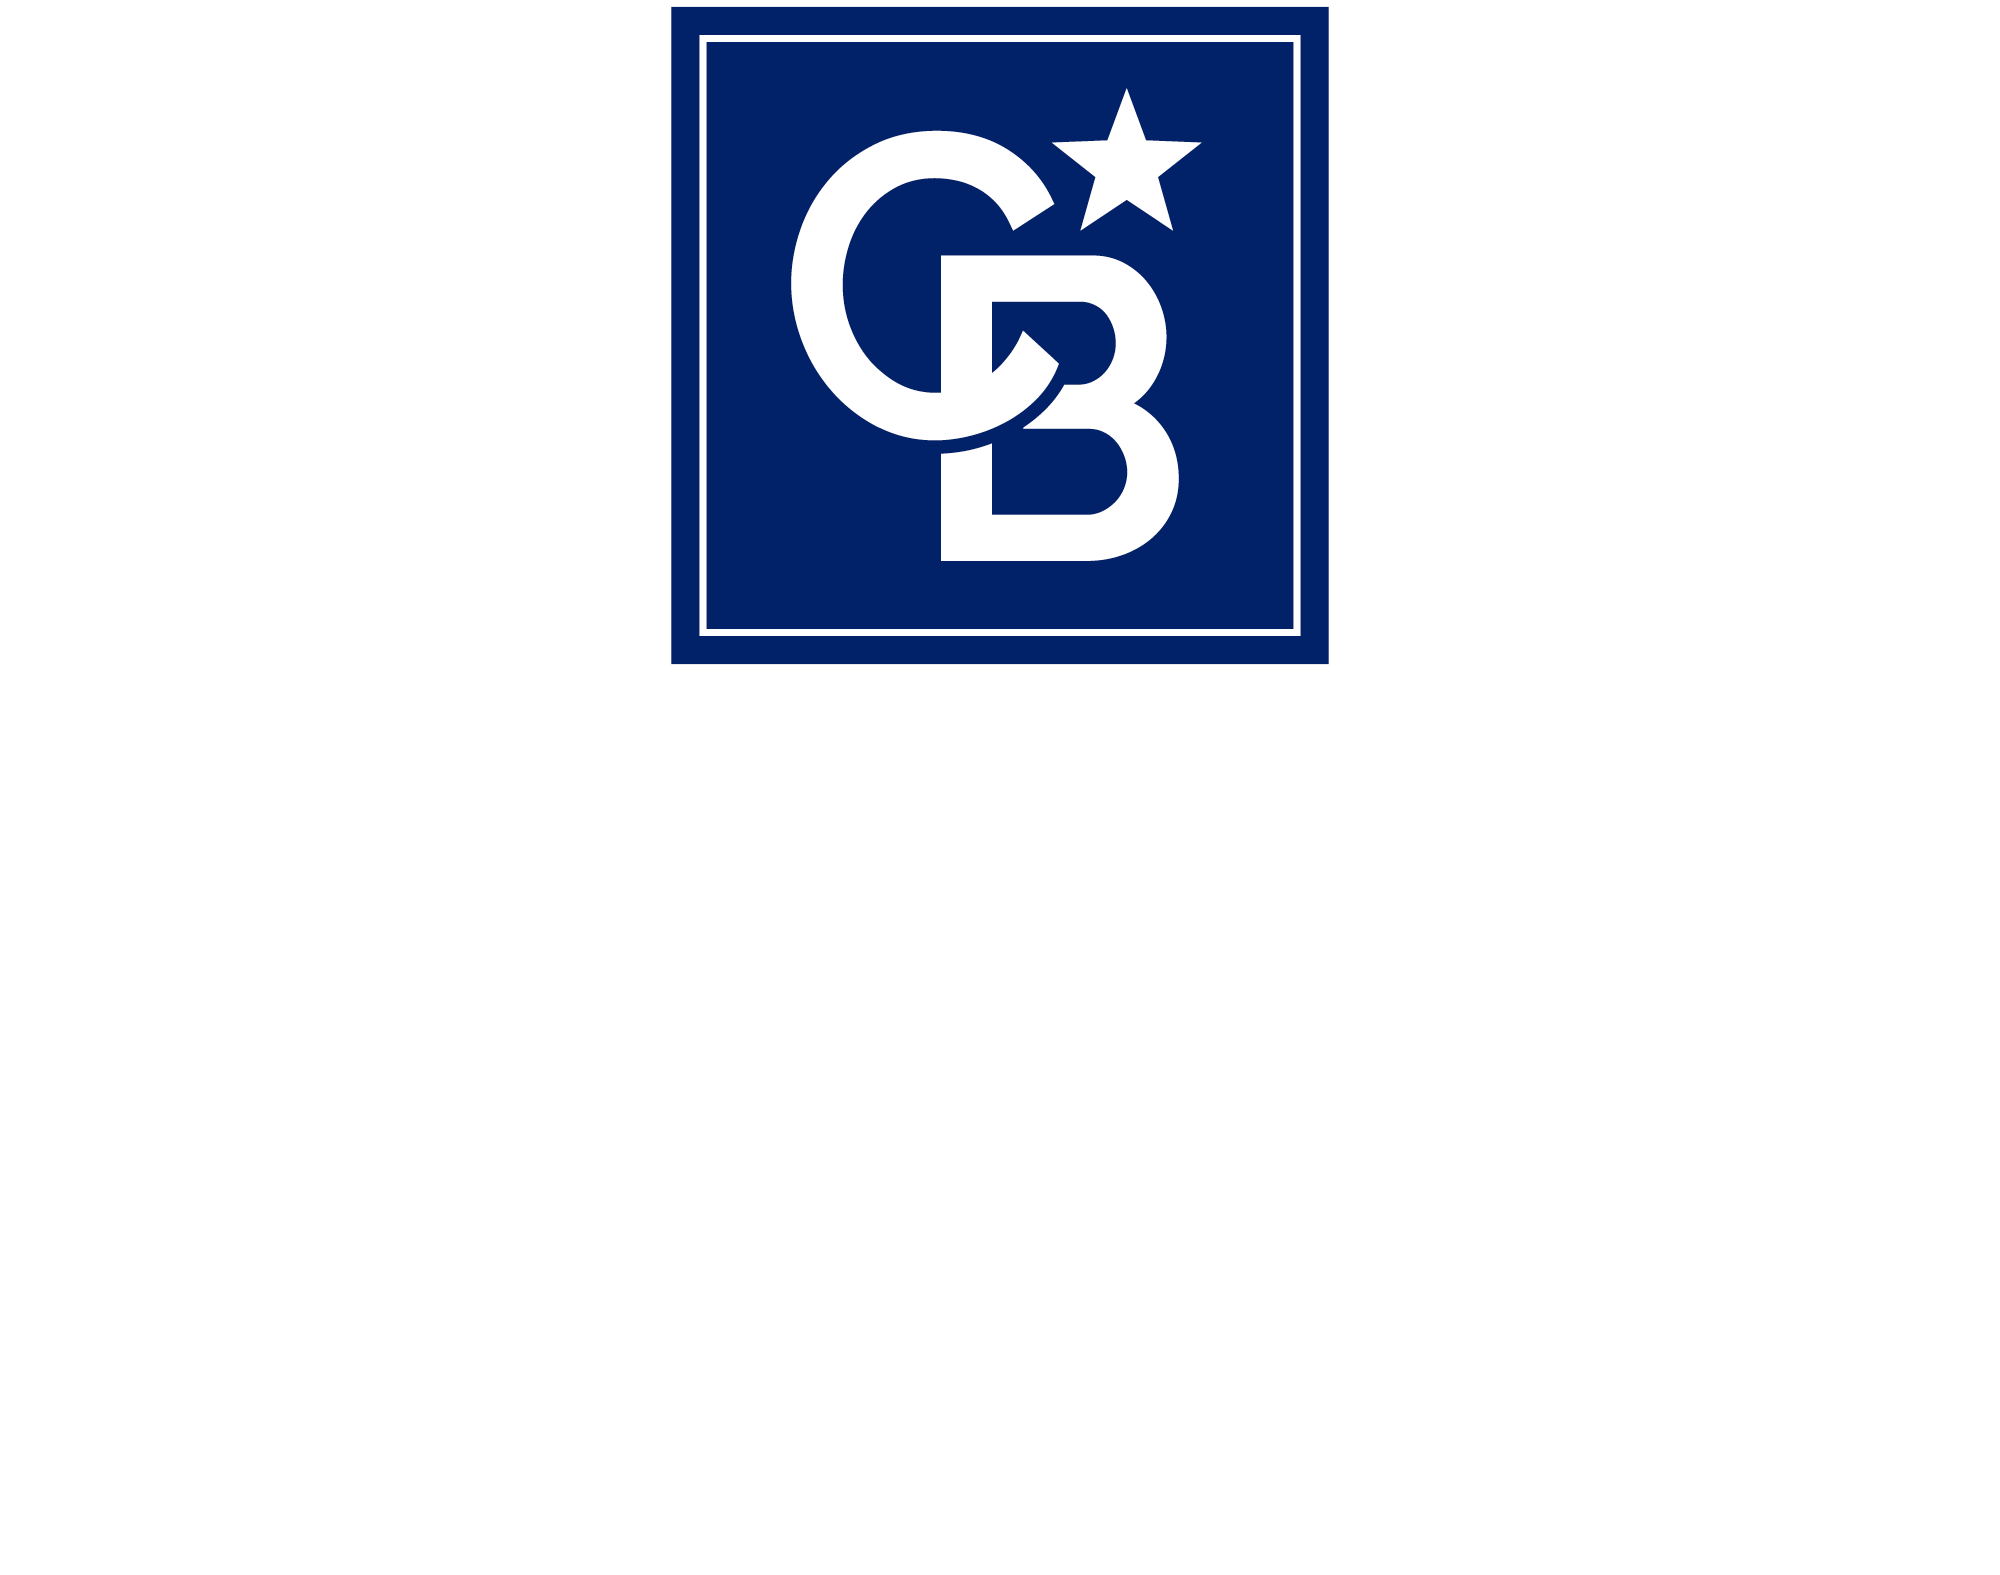 Coldwell Banker Commercial Properties